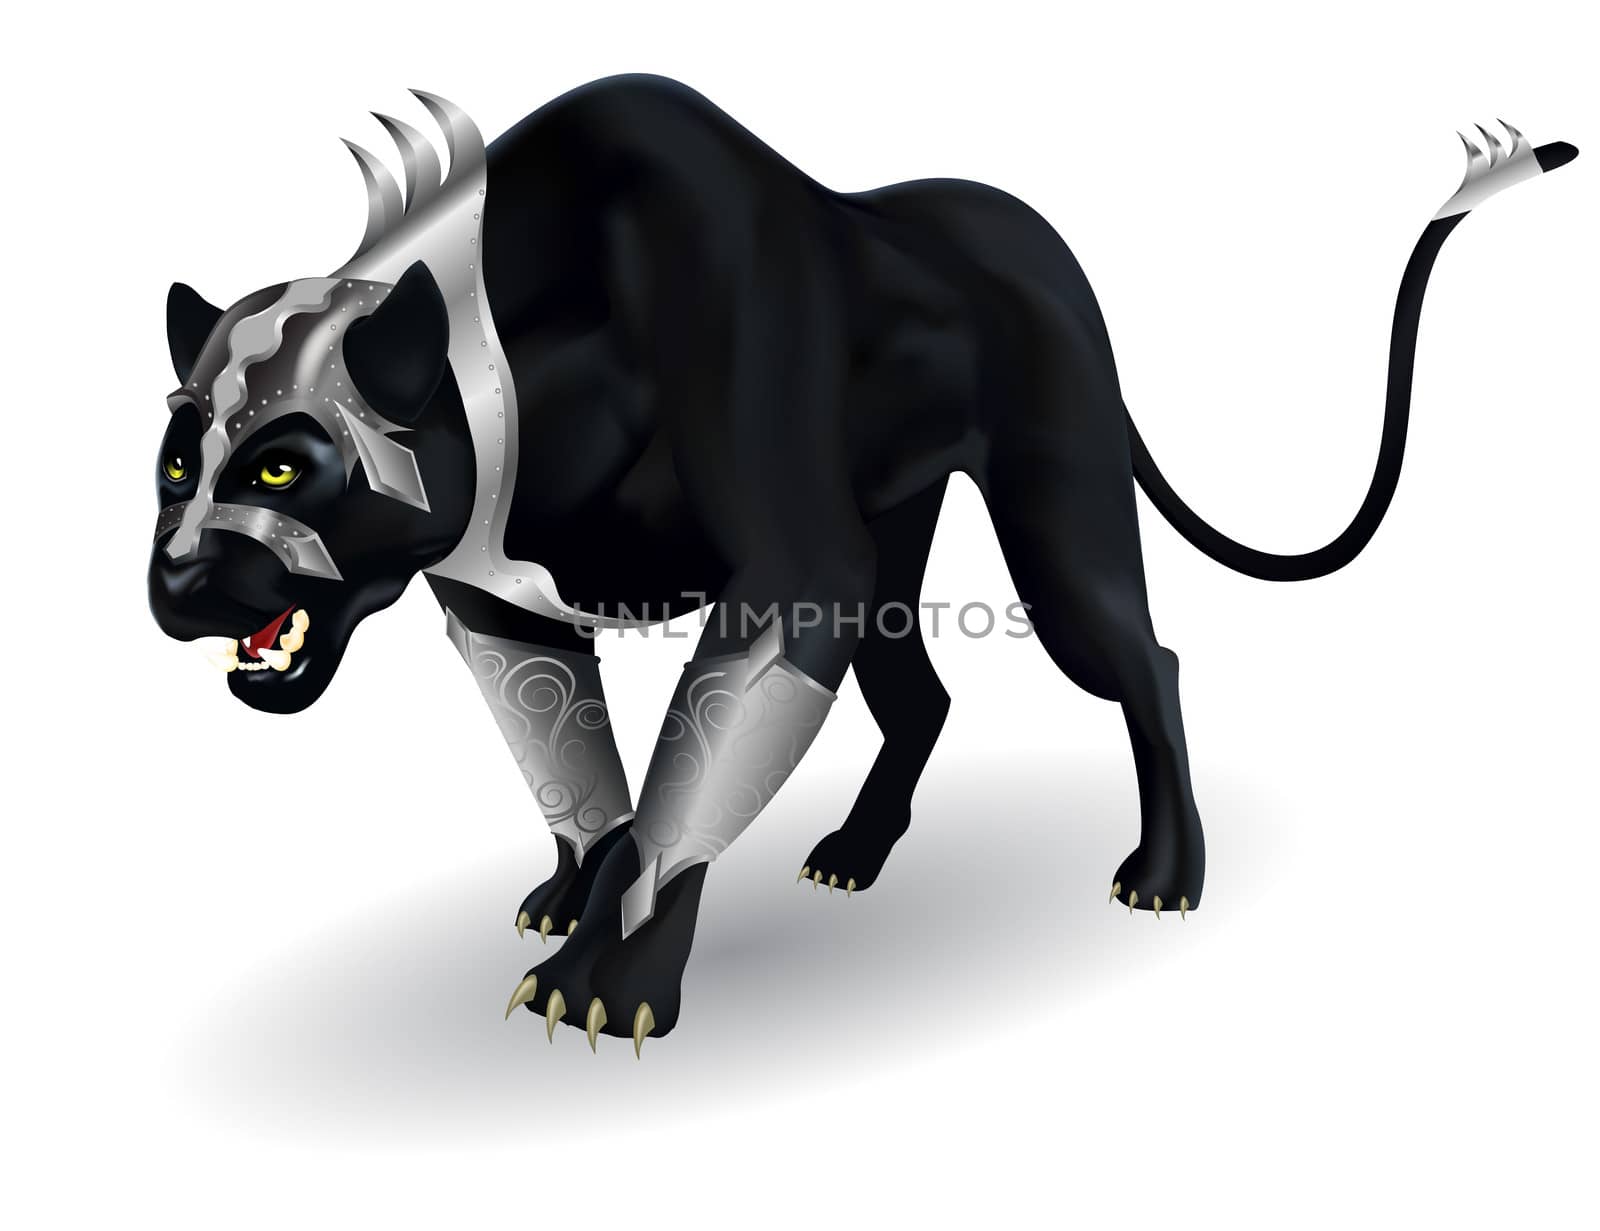 combat aggressive black panther in the armor on a white background